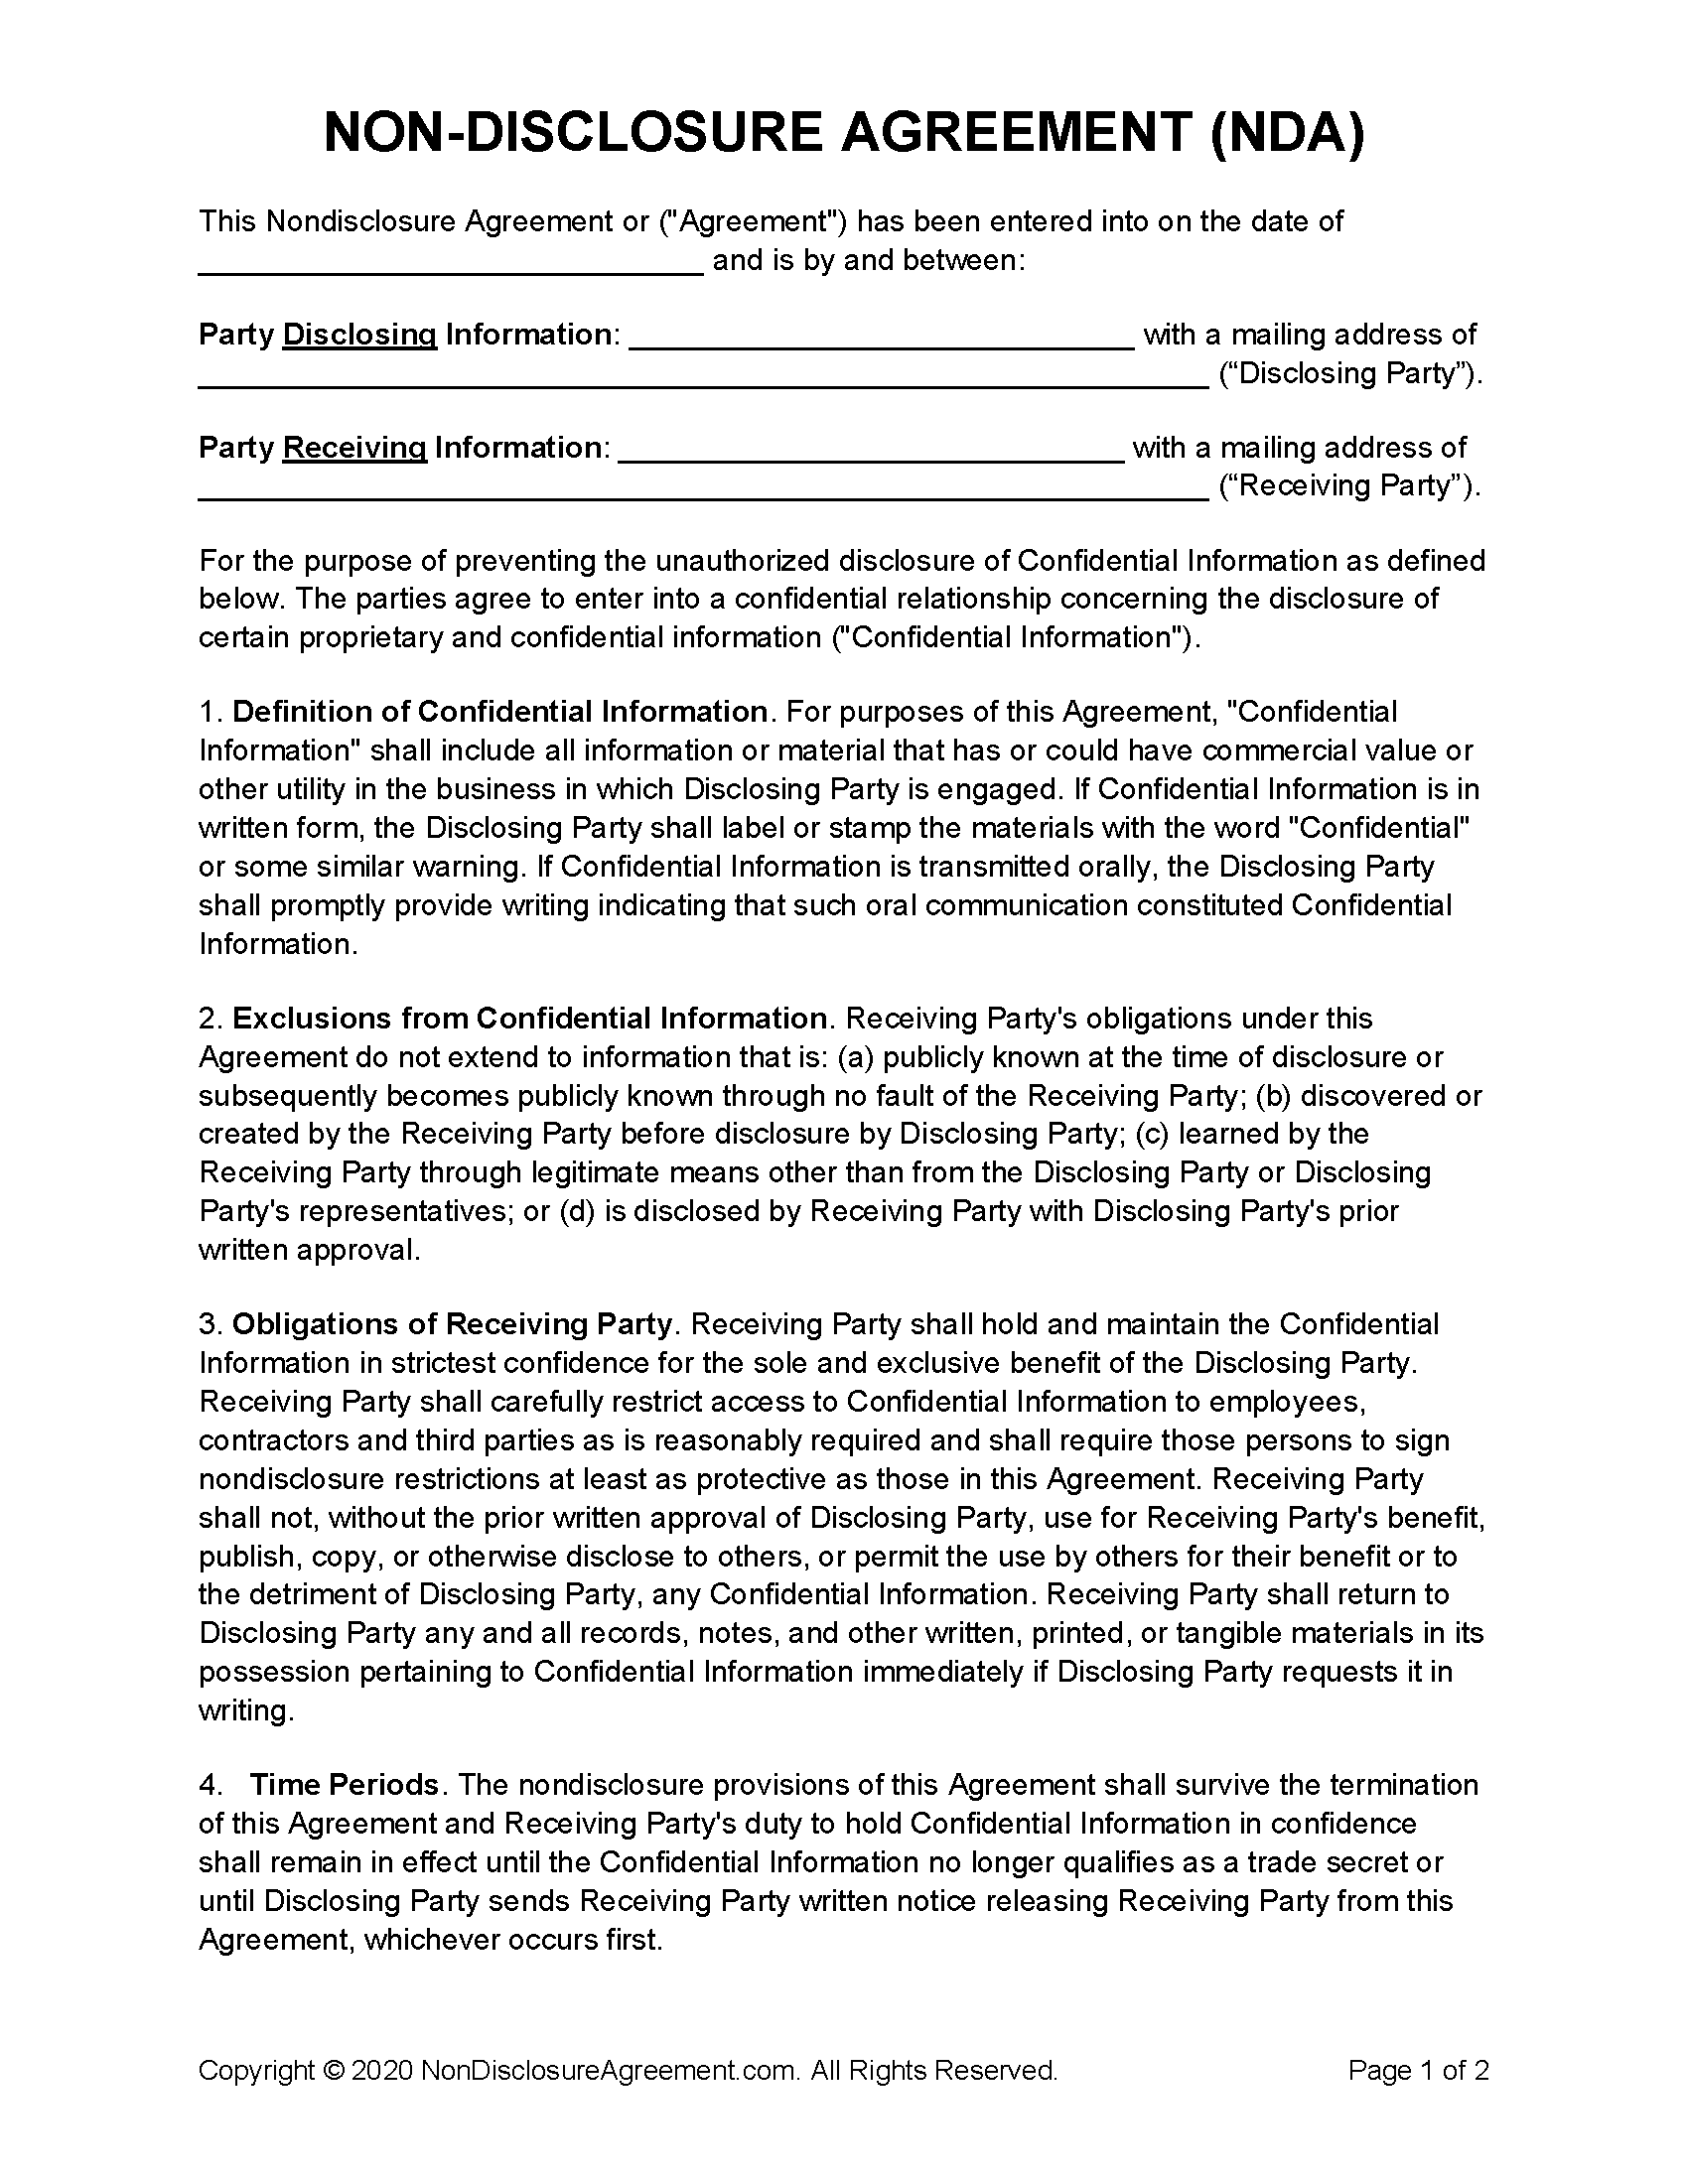 Non-Disclosure Agreement (NDA) Template – Sample For financial confidentiality agreement template